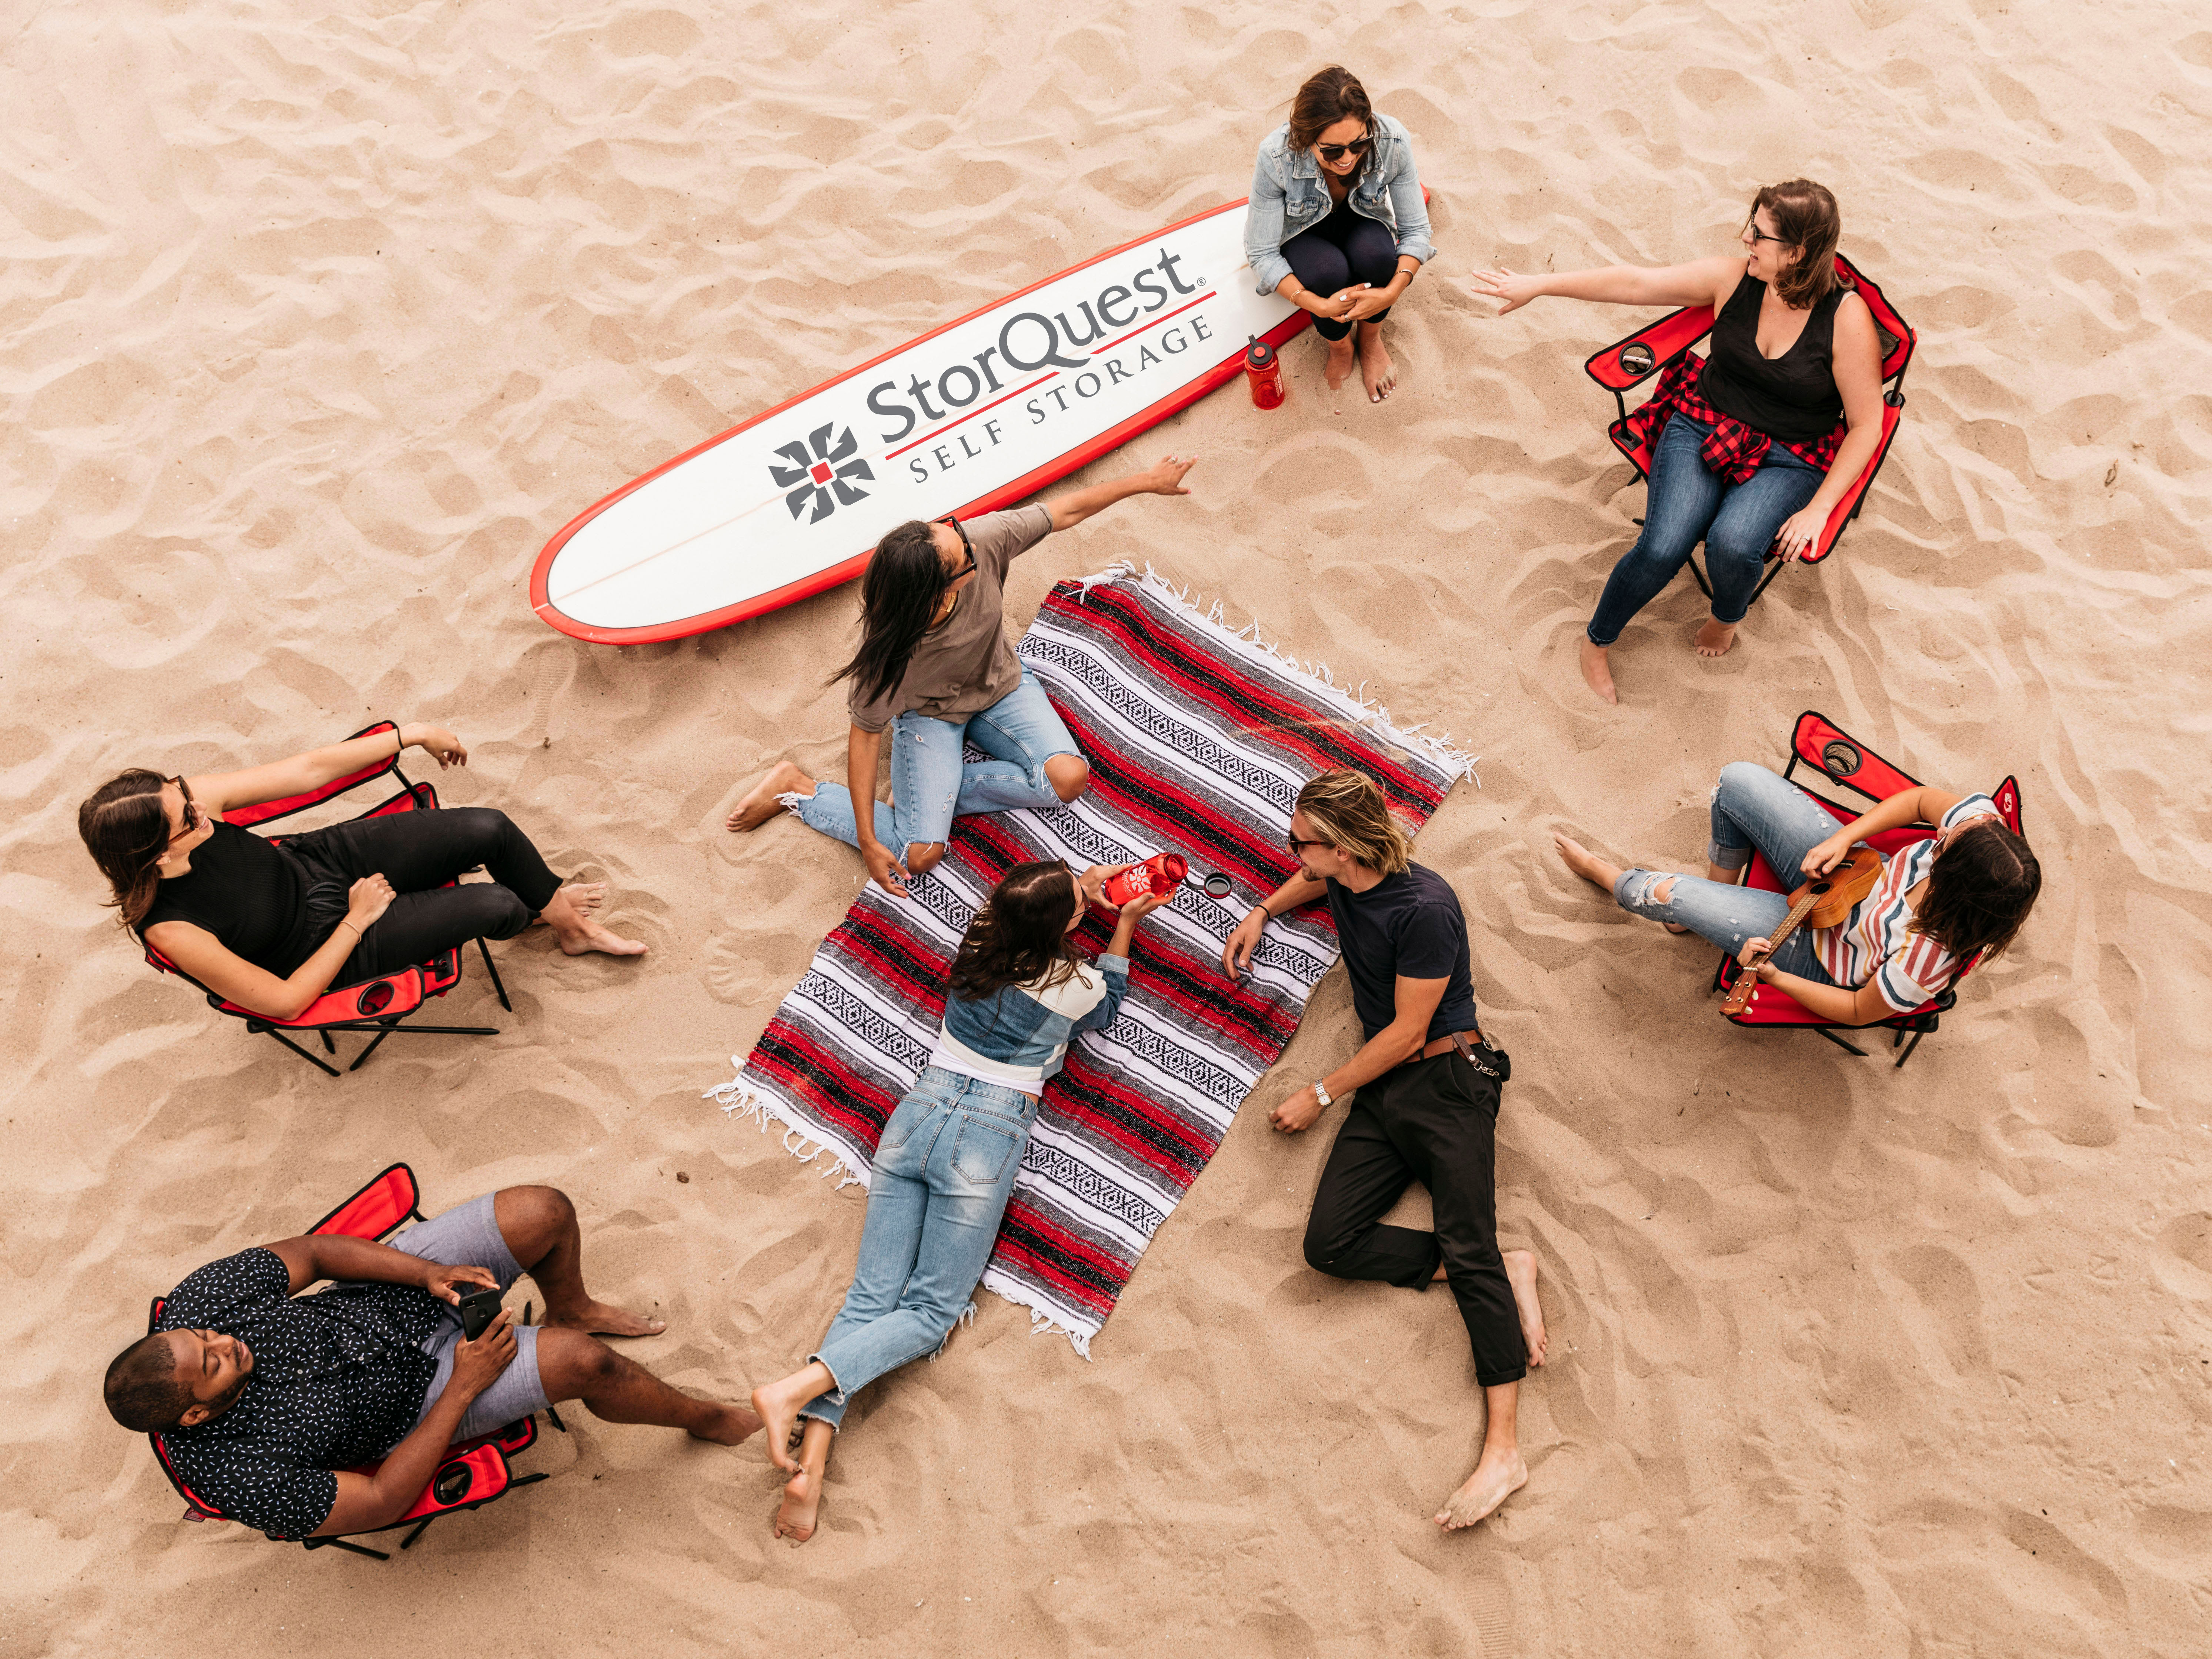 StorQuest employees at a beach event with surfboard. 